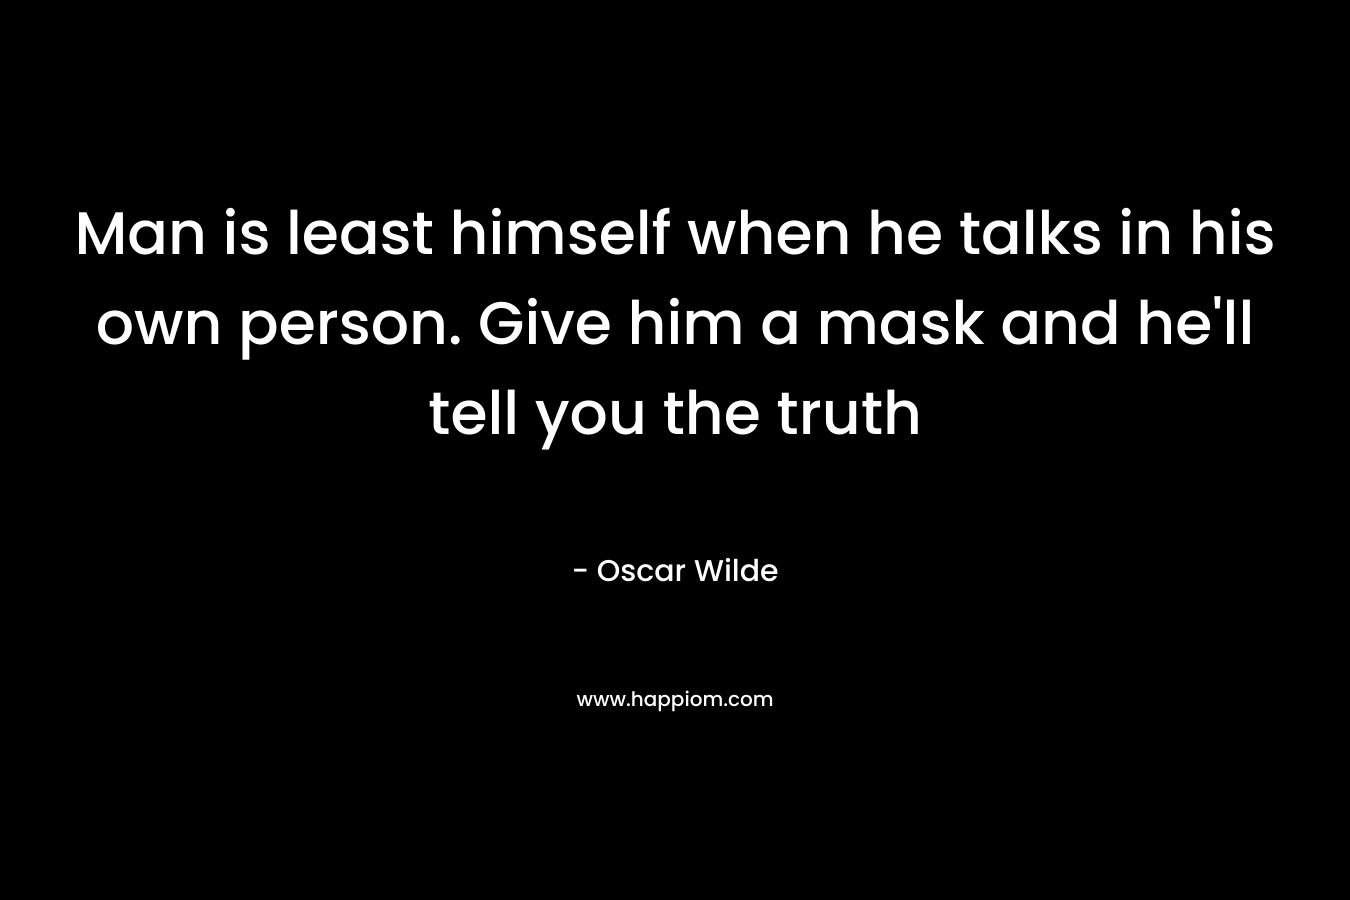 Man is least himself when he talks in his own person. Give him a mask and he'll tell you the truth